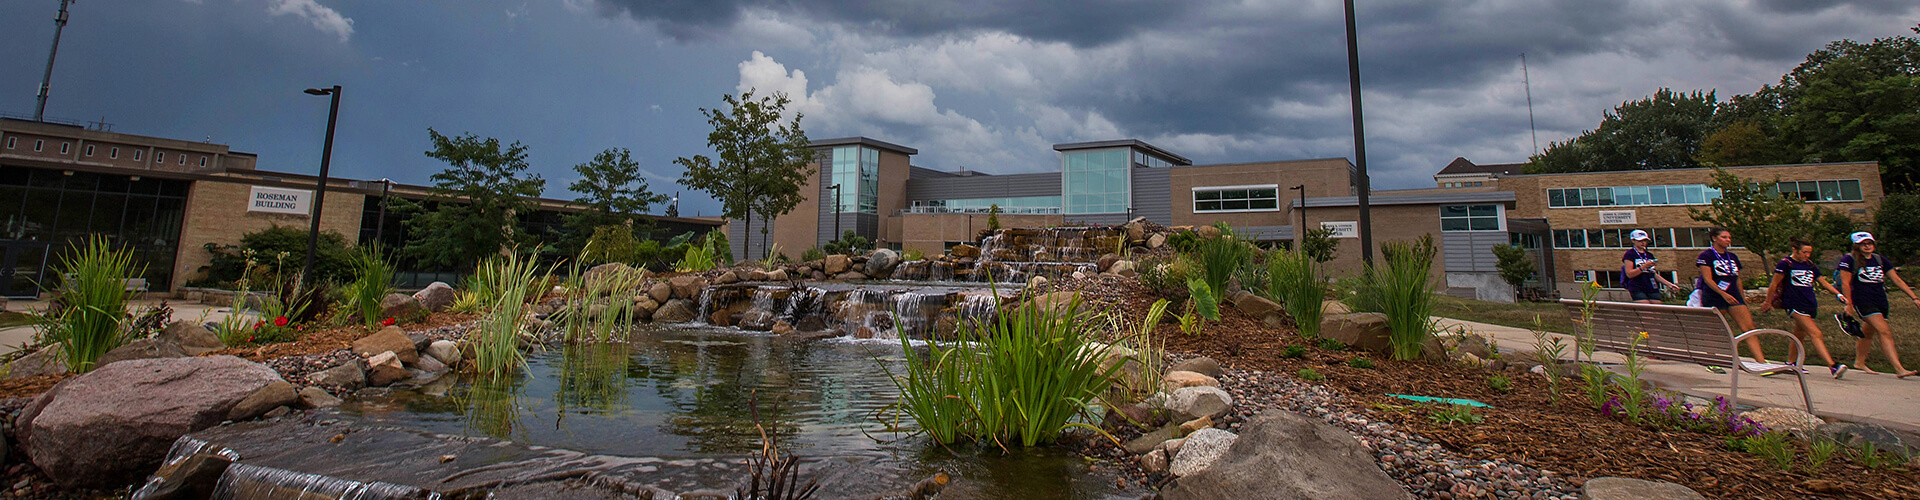 A landscaped water feature with cascading falls in front of a modern building, under a partly cloudy sky, with several people walking along the path.